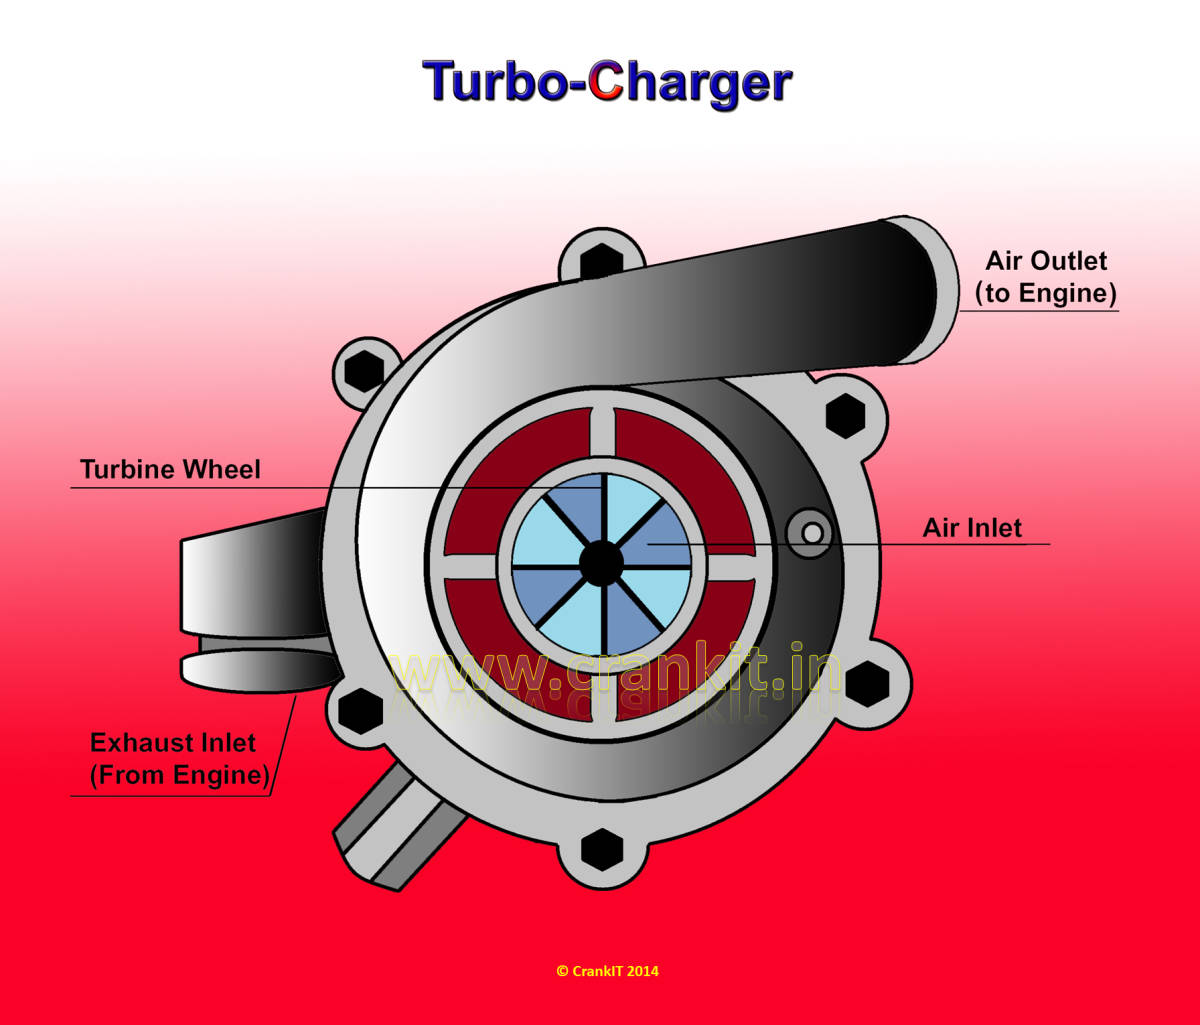 Find out How a Turbocharger works Turbocharger DiagramCrankit